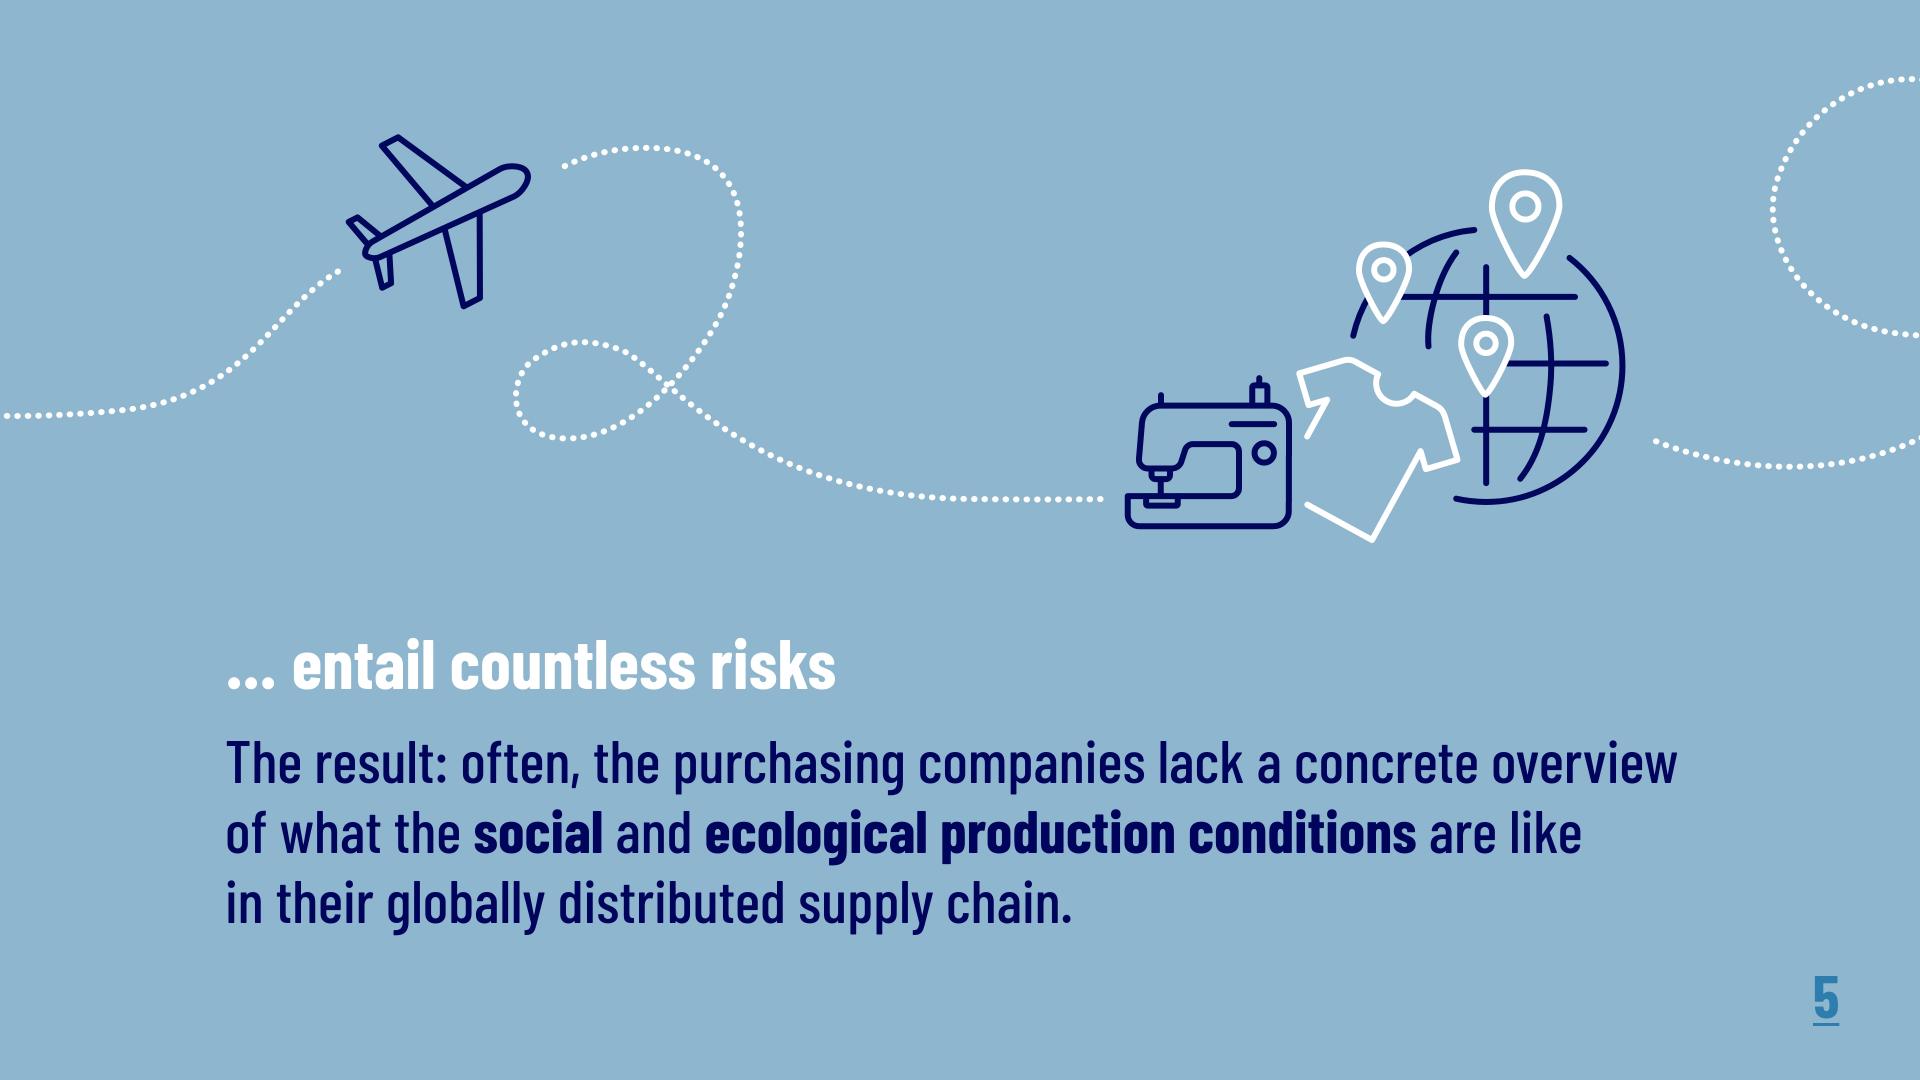 ...entail countless risks: The Result: often, the purchasing companies lack a concrete overview of what the social and ecological production conditions are like in their globally distributed supply chain. 